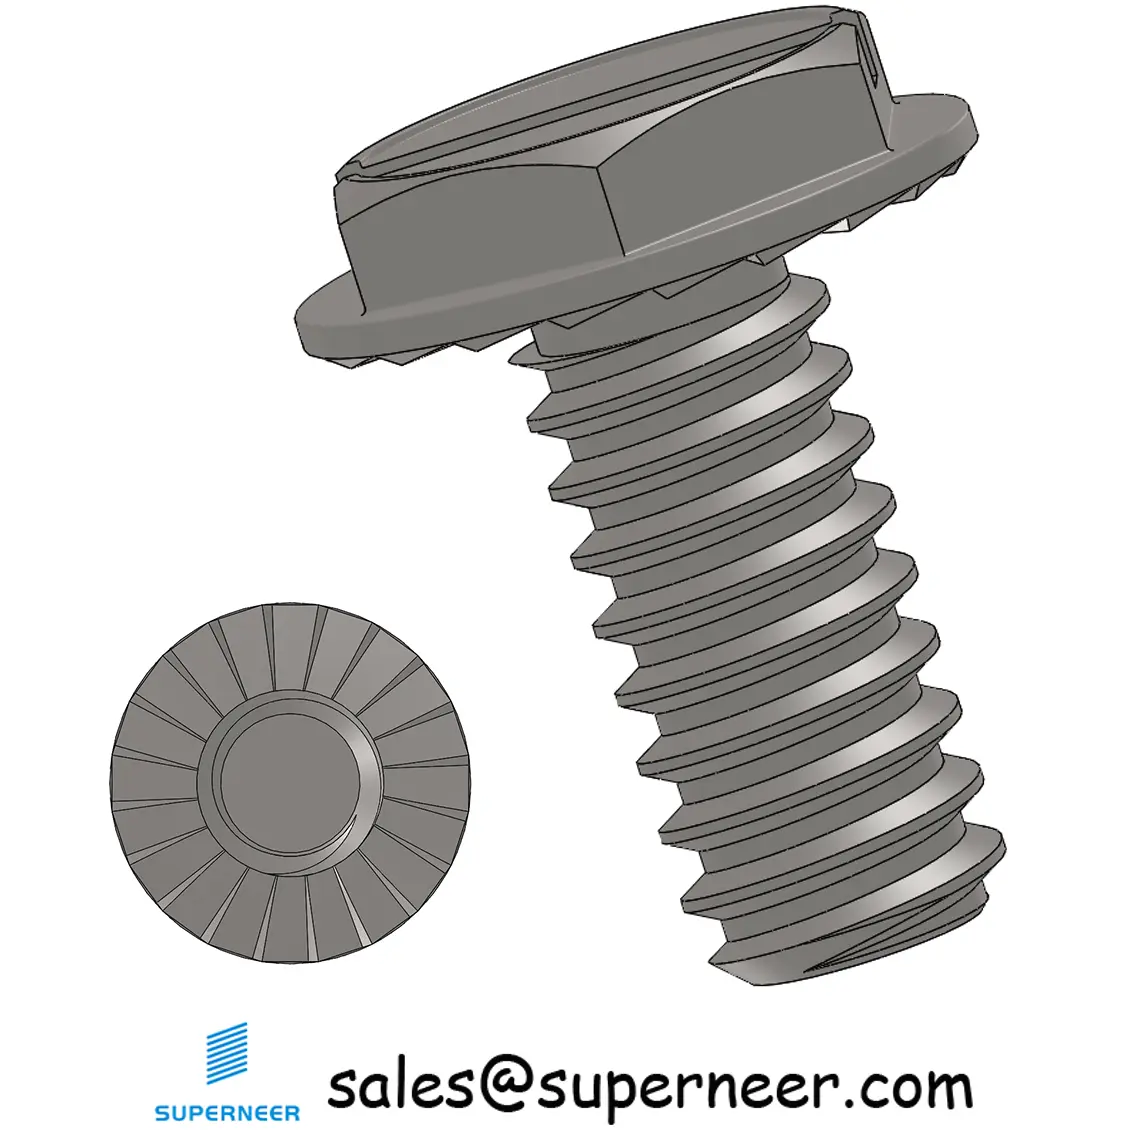 4-40 x 1/4" Indented Hex Washer Serrated Head Slotted Machine Screw SUS304 Stainless Steel Inox